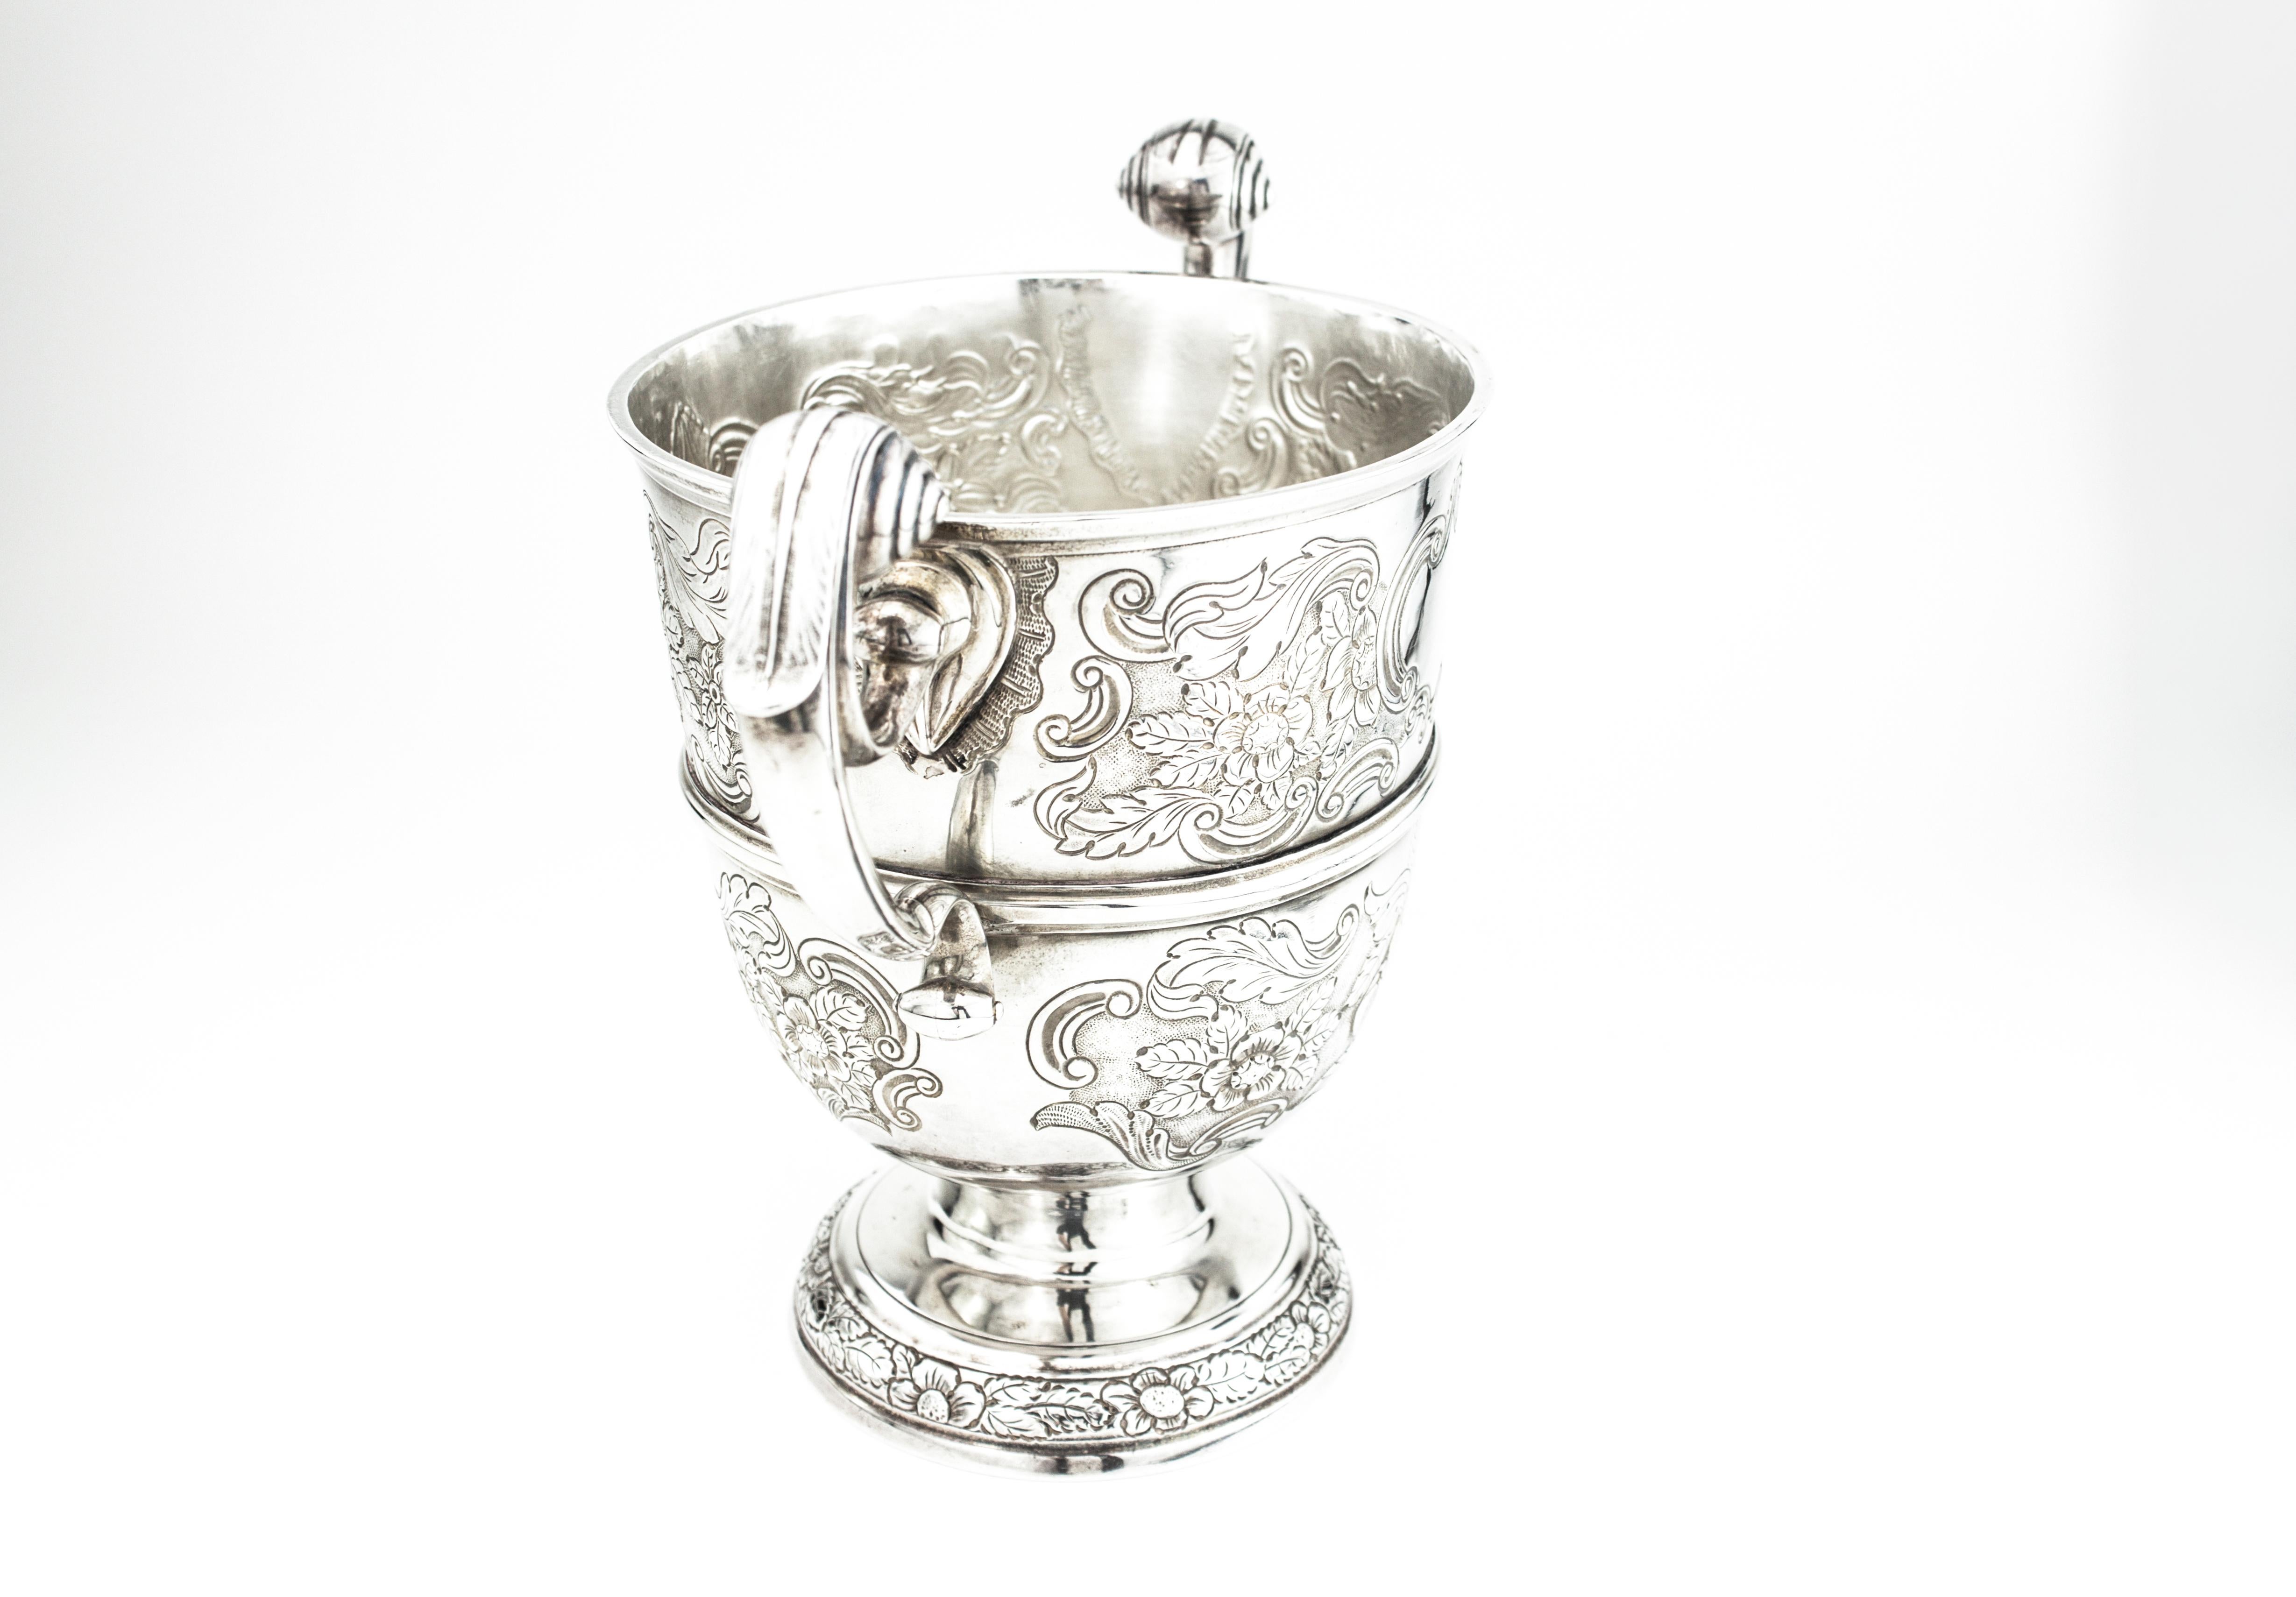 Antique George III sterling silver Irish cup
Maker: I E, Unidentified
Made in Ireland, Dublin, 1769
Fully hallmarked.

Dimensions -
Length 26.5 cm
Width 14.5 cm
Height 20 cm
Weight: 930 grams

Condition: Minor wear from general usage, no